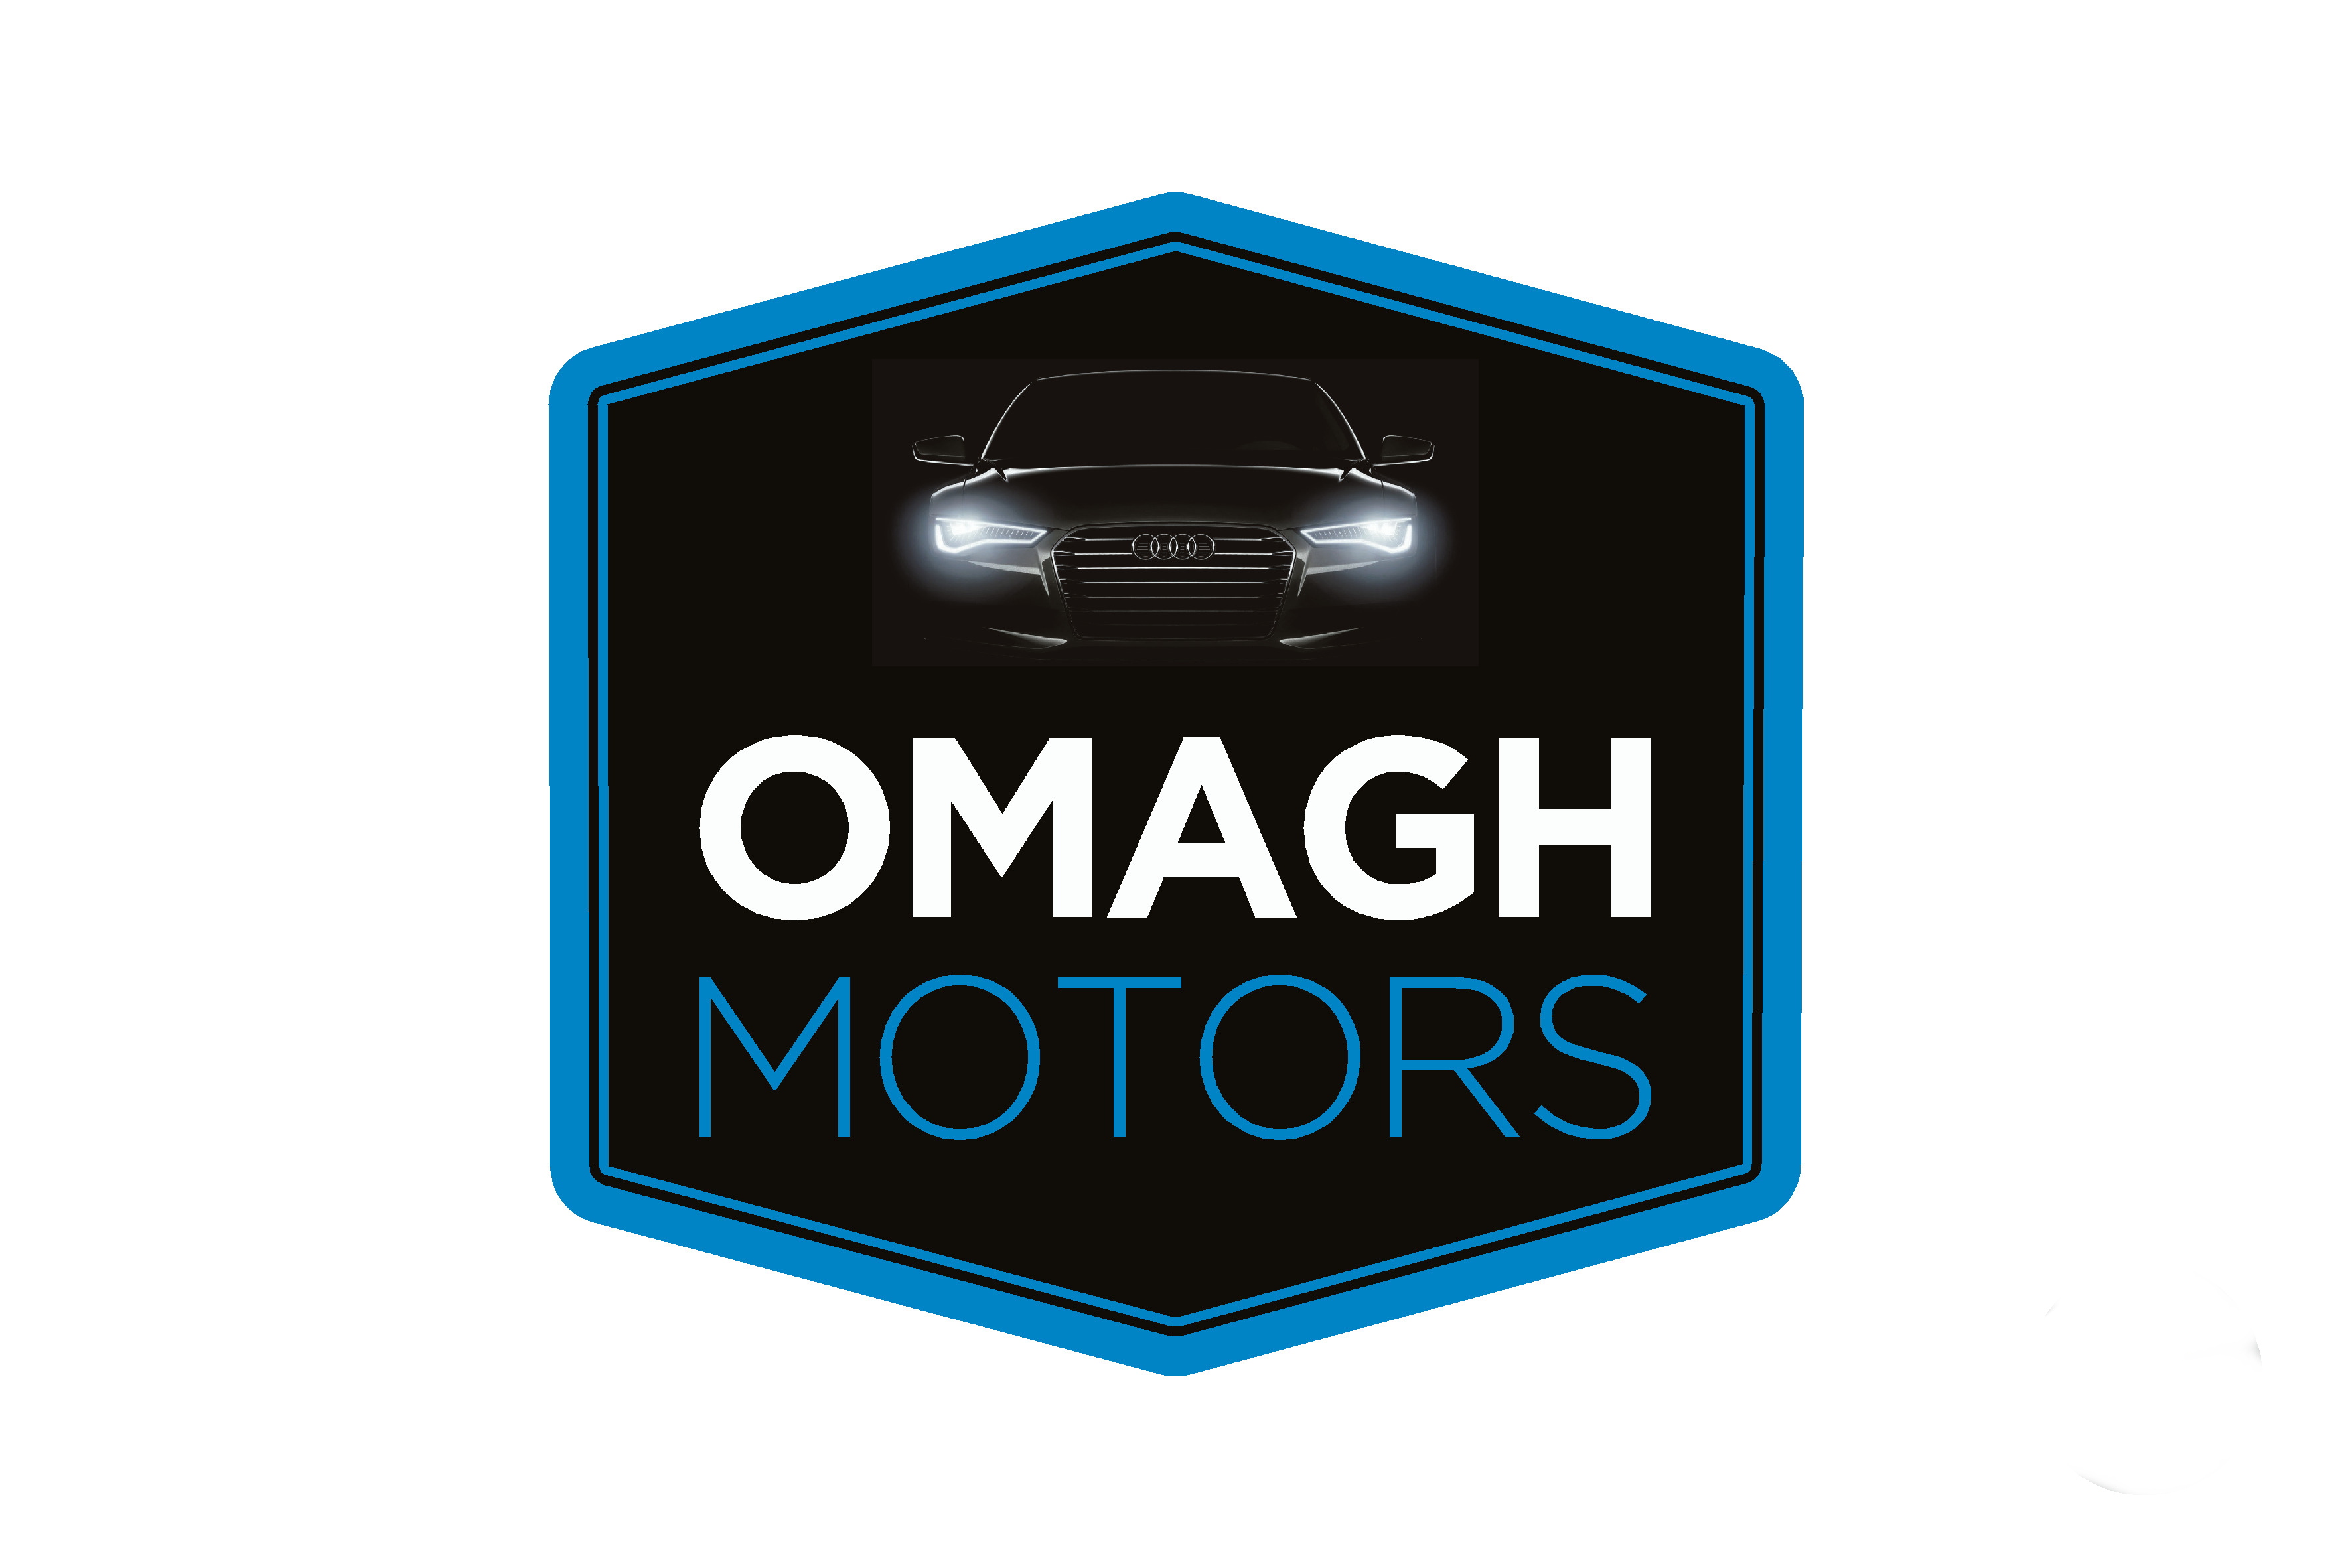 Business Profile: Omagh Motors